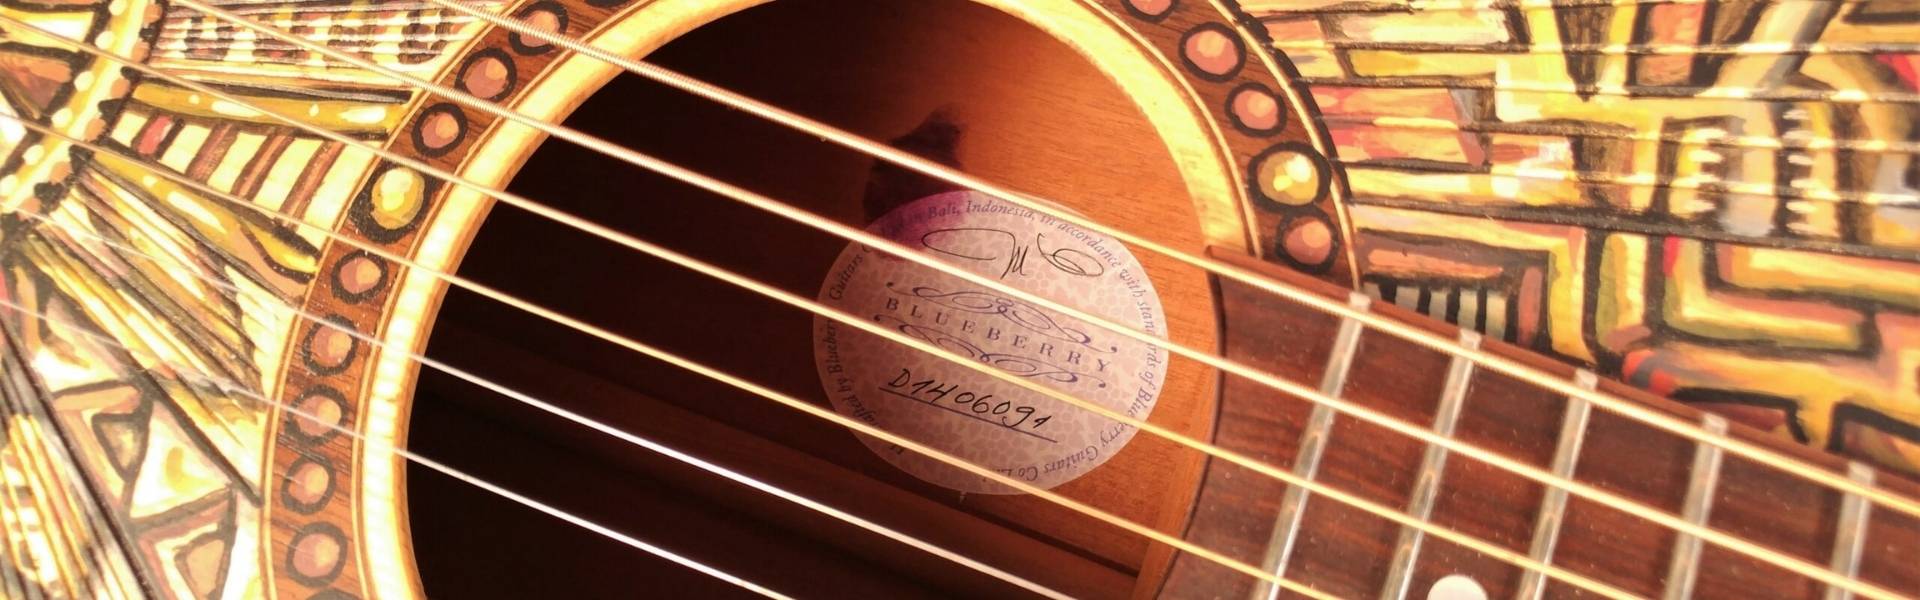 Seal of Authenticity - soundhole sticker